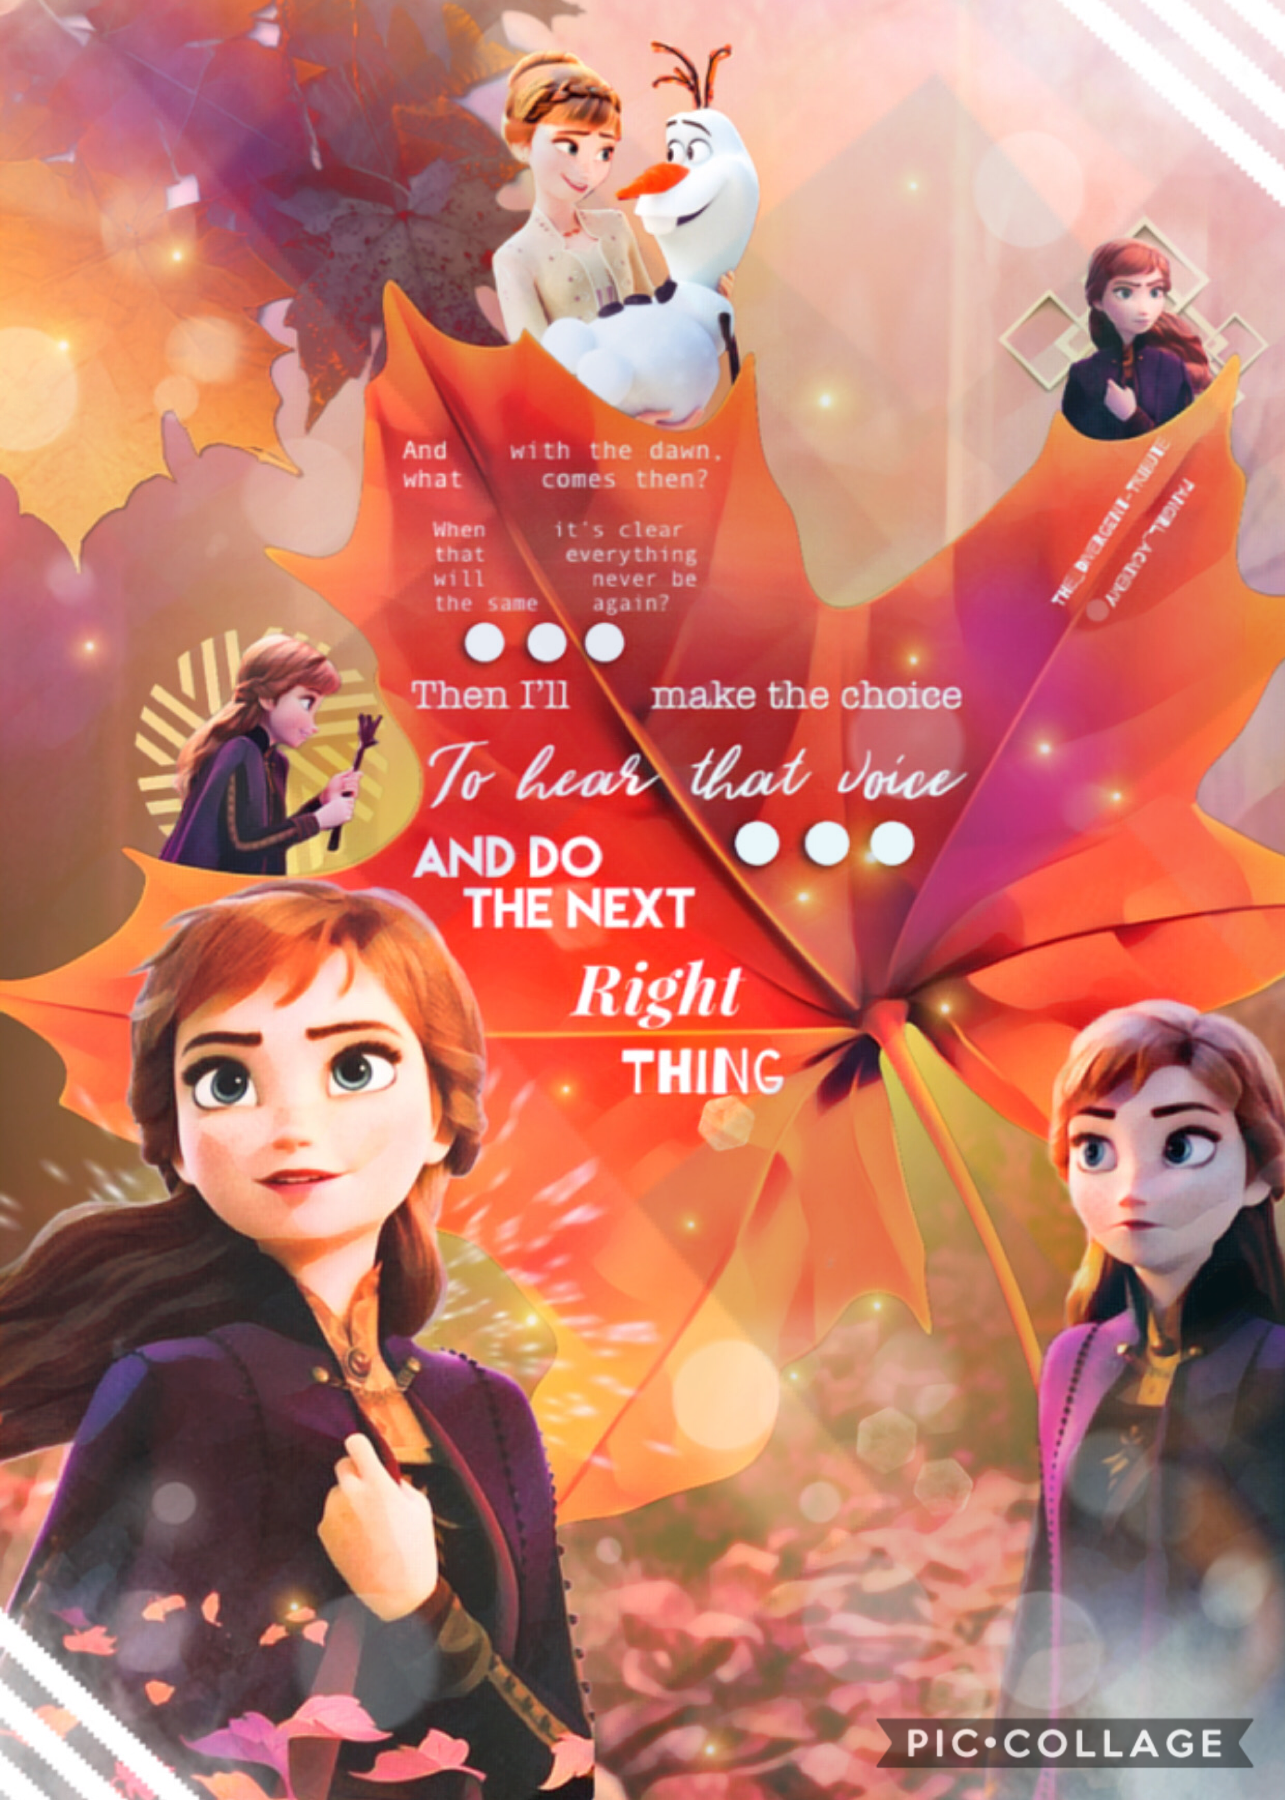 Ok...I’m kinda, sorta, OBSESSING over this! Princess Anna of Arendelle! Please tell me what you think about this...because it has to be one of my favorites ever! 
QOTD: Favorite Fall colors?
AOTD: Orange, Red, and Purple! 

🍁Rate /10!🍁